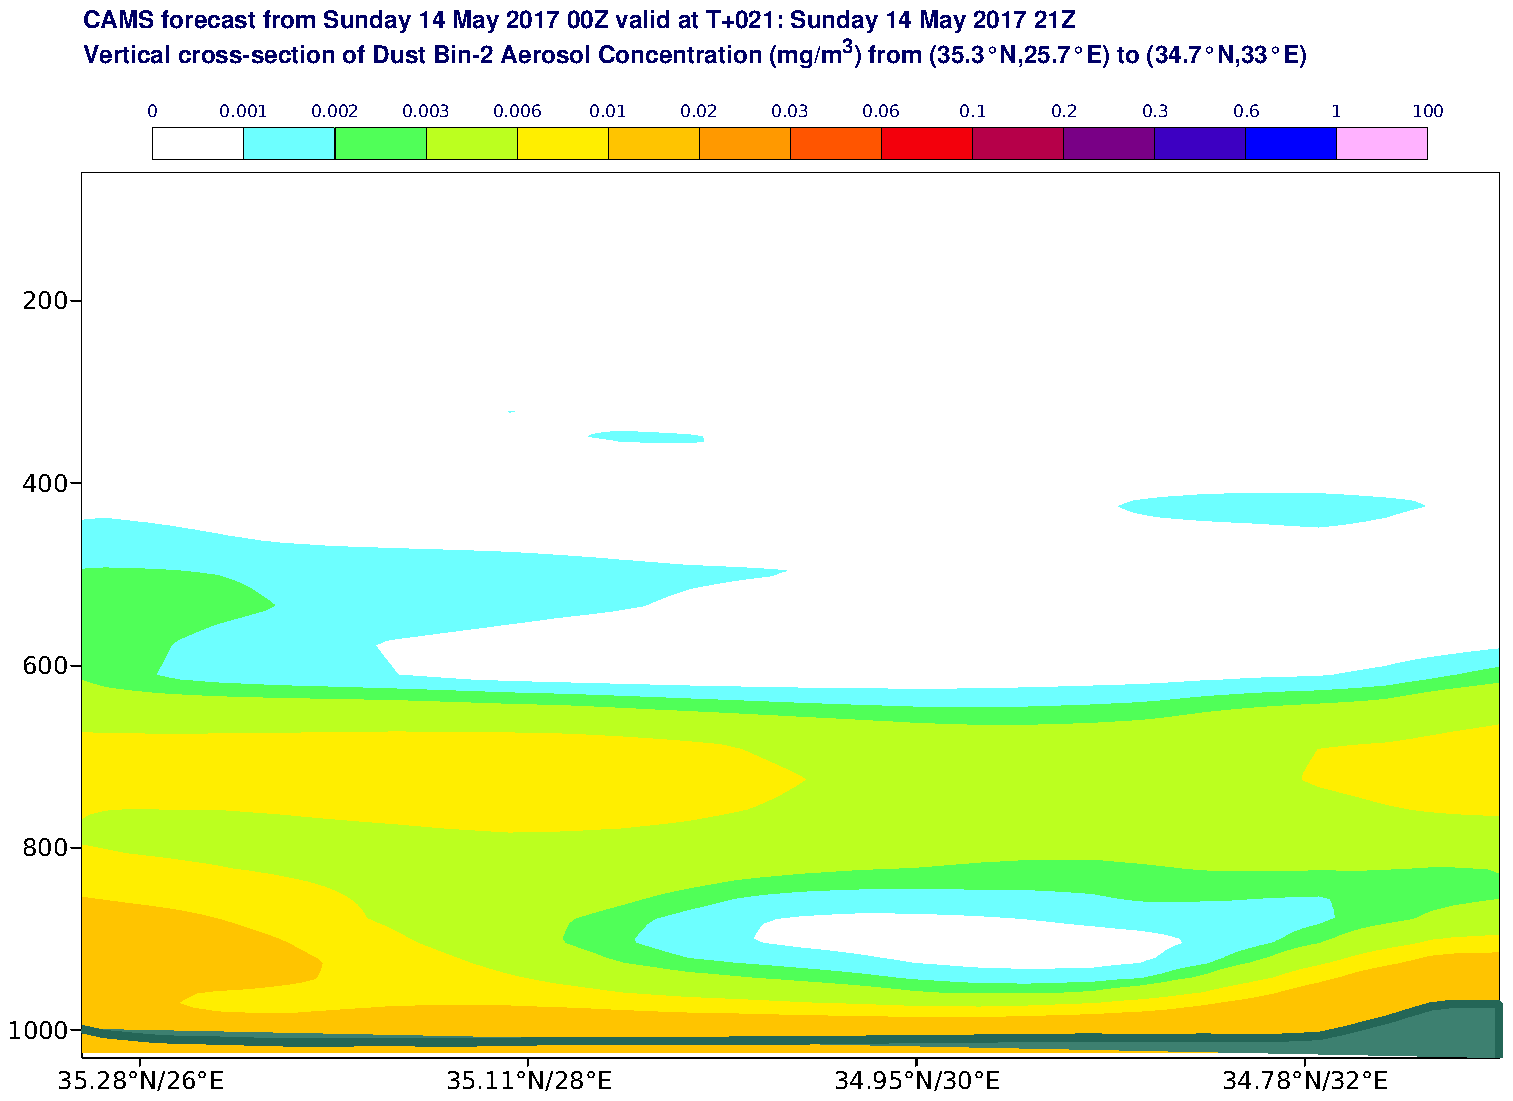 Vertical cross-section of Dust Bin-2 Aerosol Concentration (mg/m3) valid at T21 - 2017-05-14 21:00